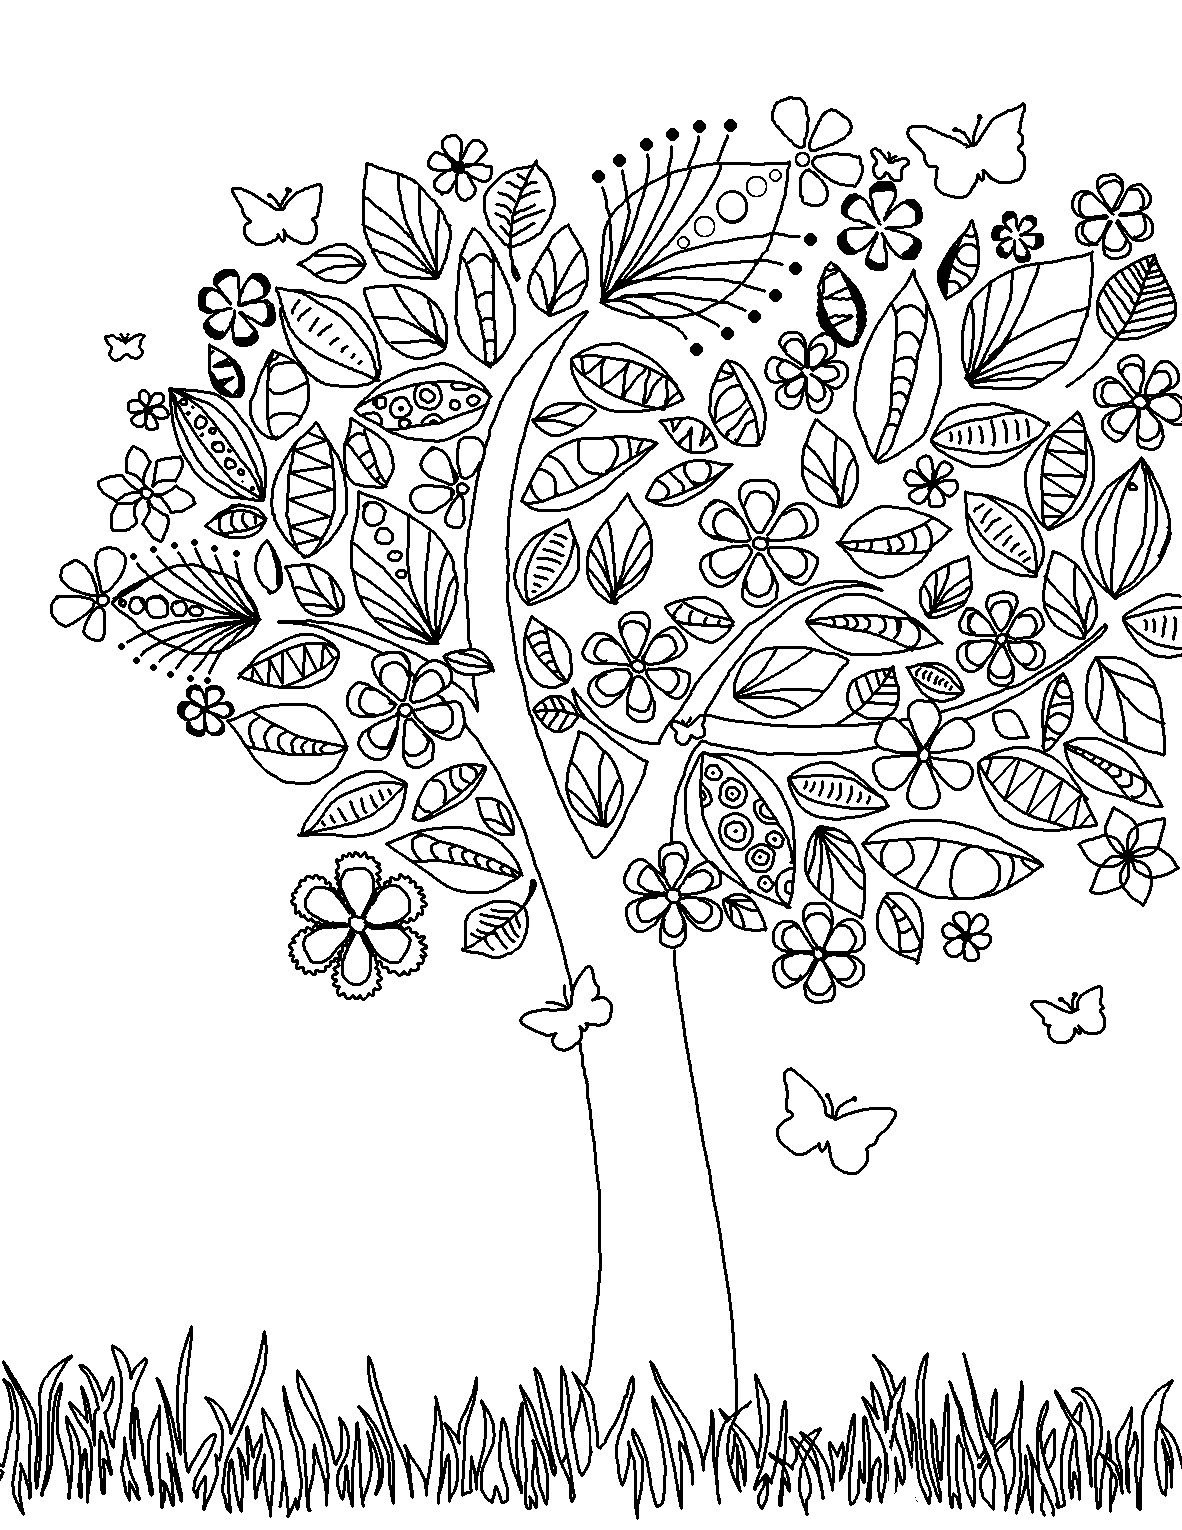 Coloring Page World - Tree Coloring Page With Flowers And - Tree Coloring Pages Free Printable